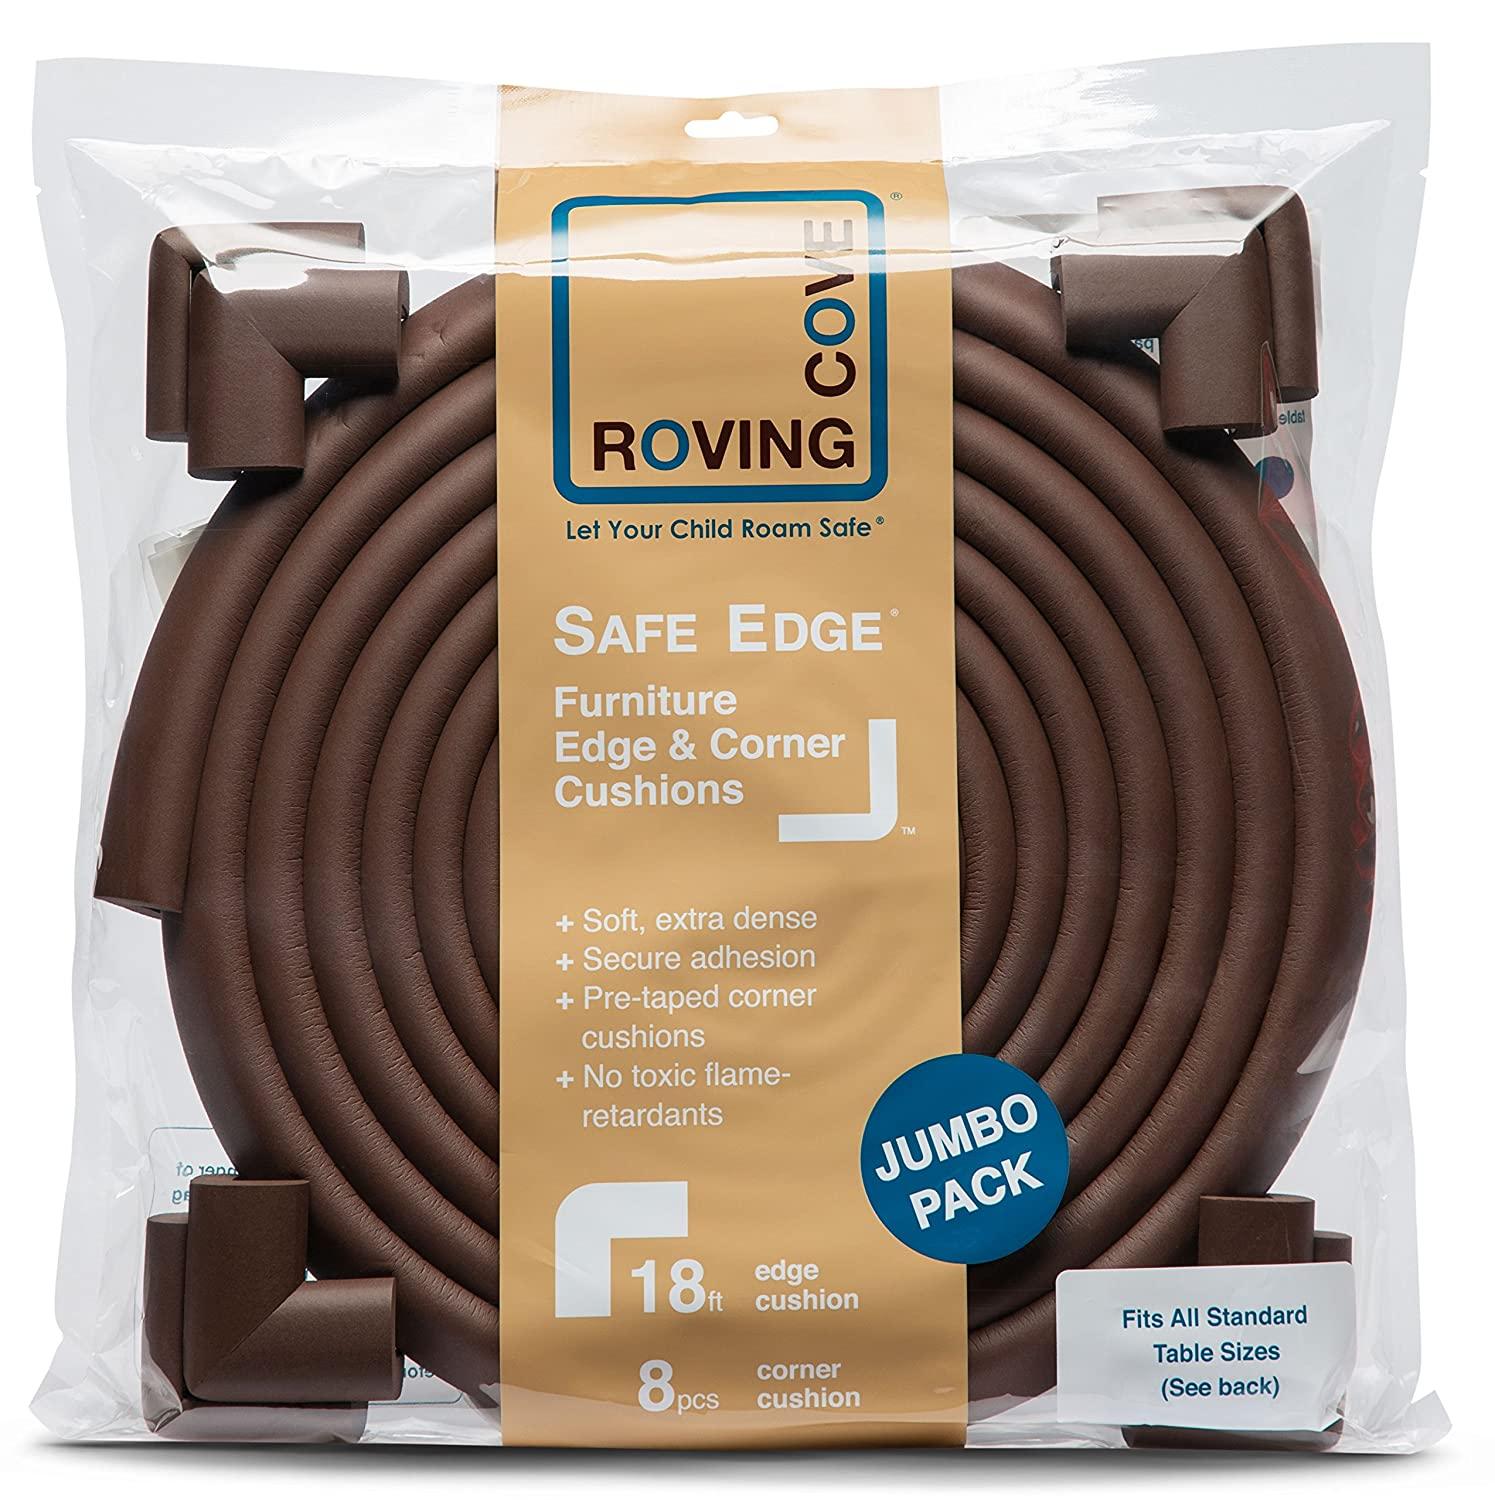 Roving Cove HeftyFit Edge Protector for Baby Proofing, Large 12ft Edge